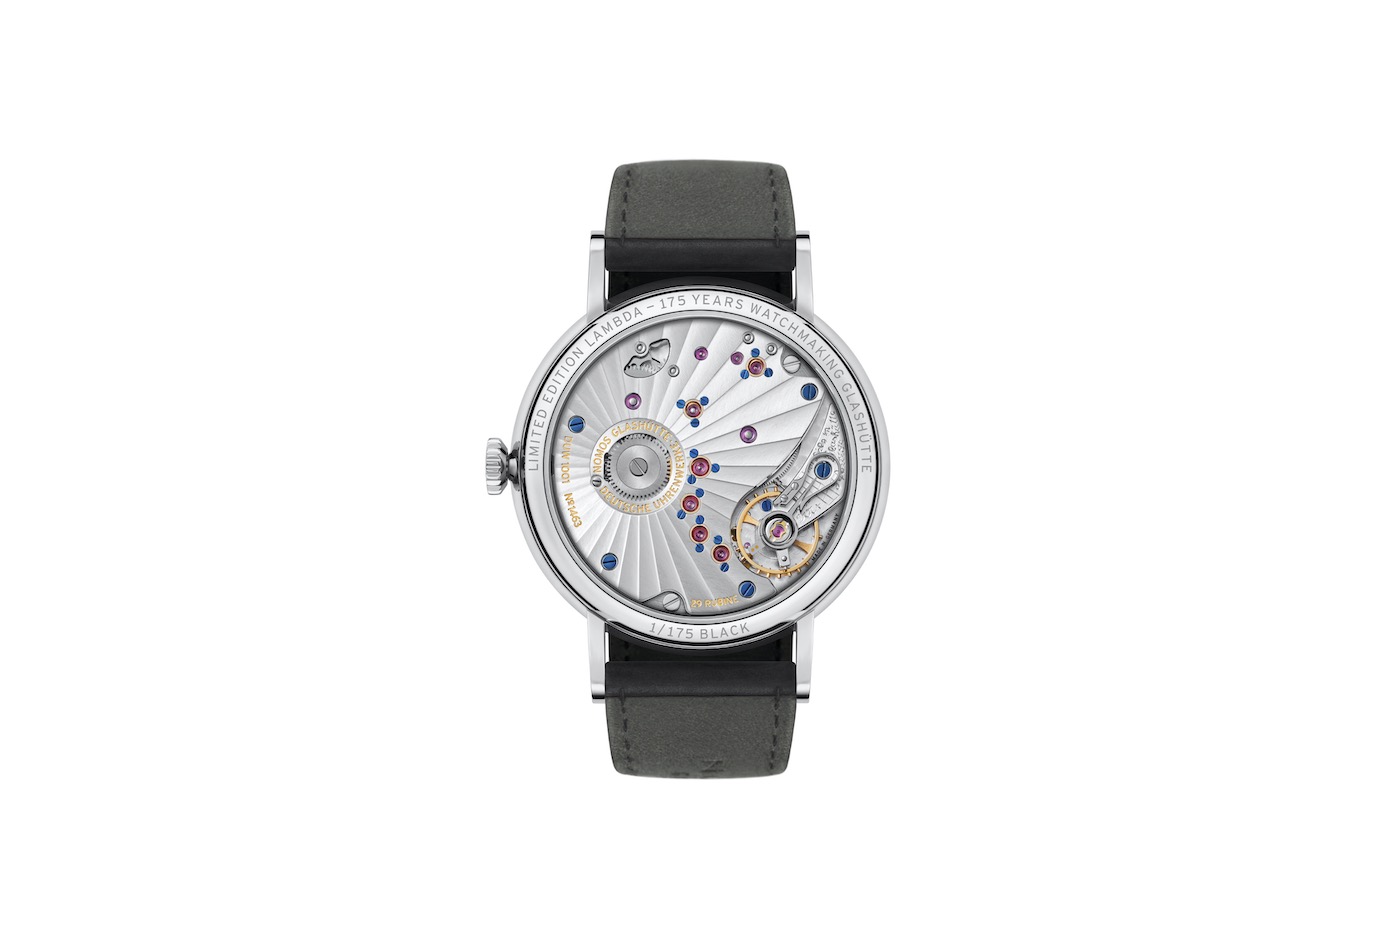 NOMOS Introduces a New Stainless Steel Lambda replica watches to Honor 175 Years of Glashütte Watchmaking Sponsored post